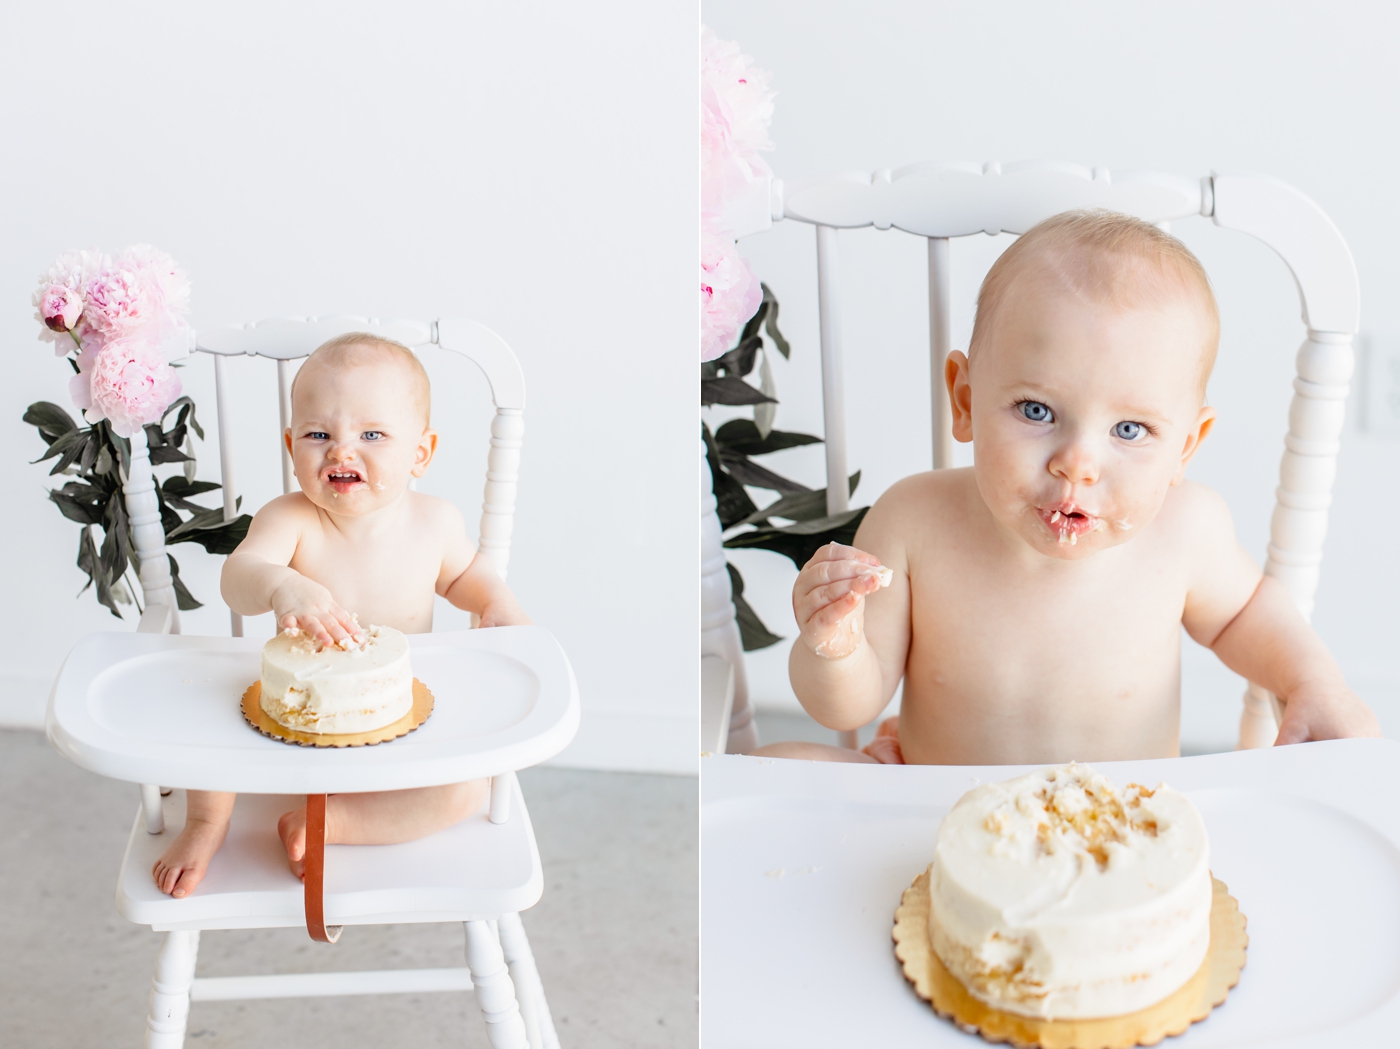 Toddler with lots of expressions during her first birthday cake smash session. Photos by Sana Ahmed Photography.